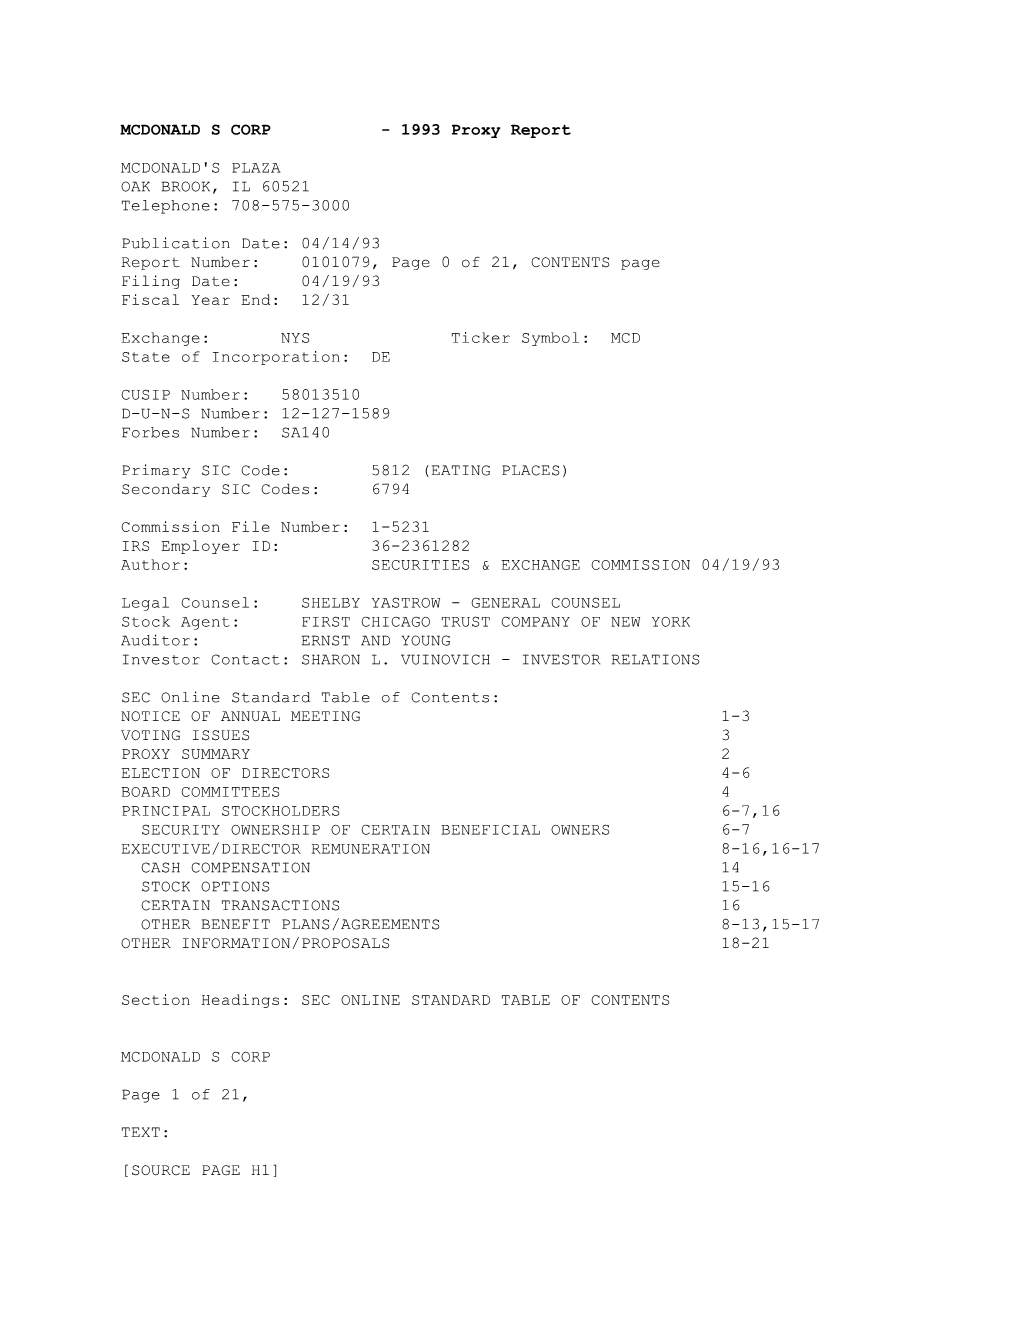 Full Report from DIALOG File 544, SEC PROXY